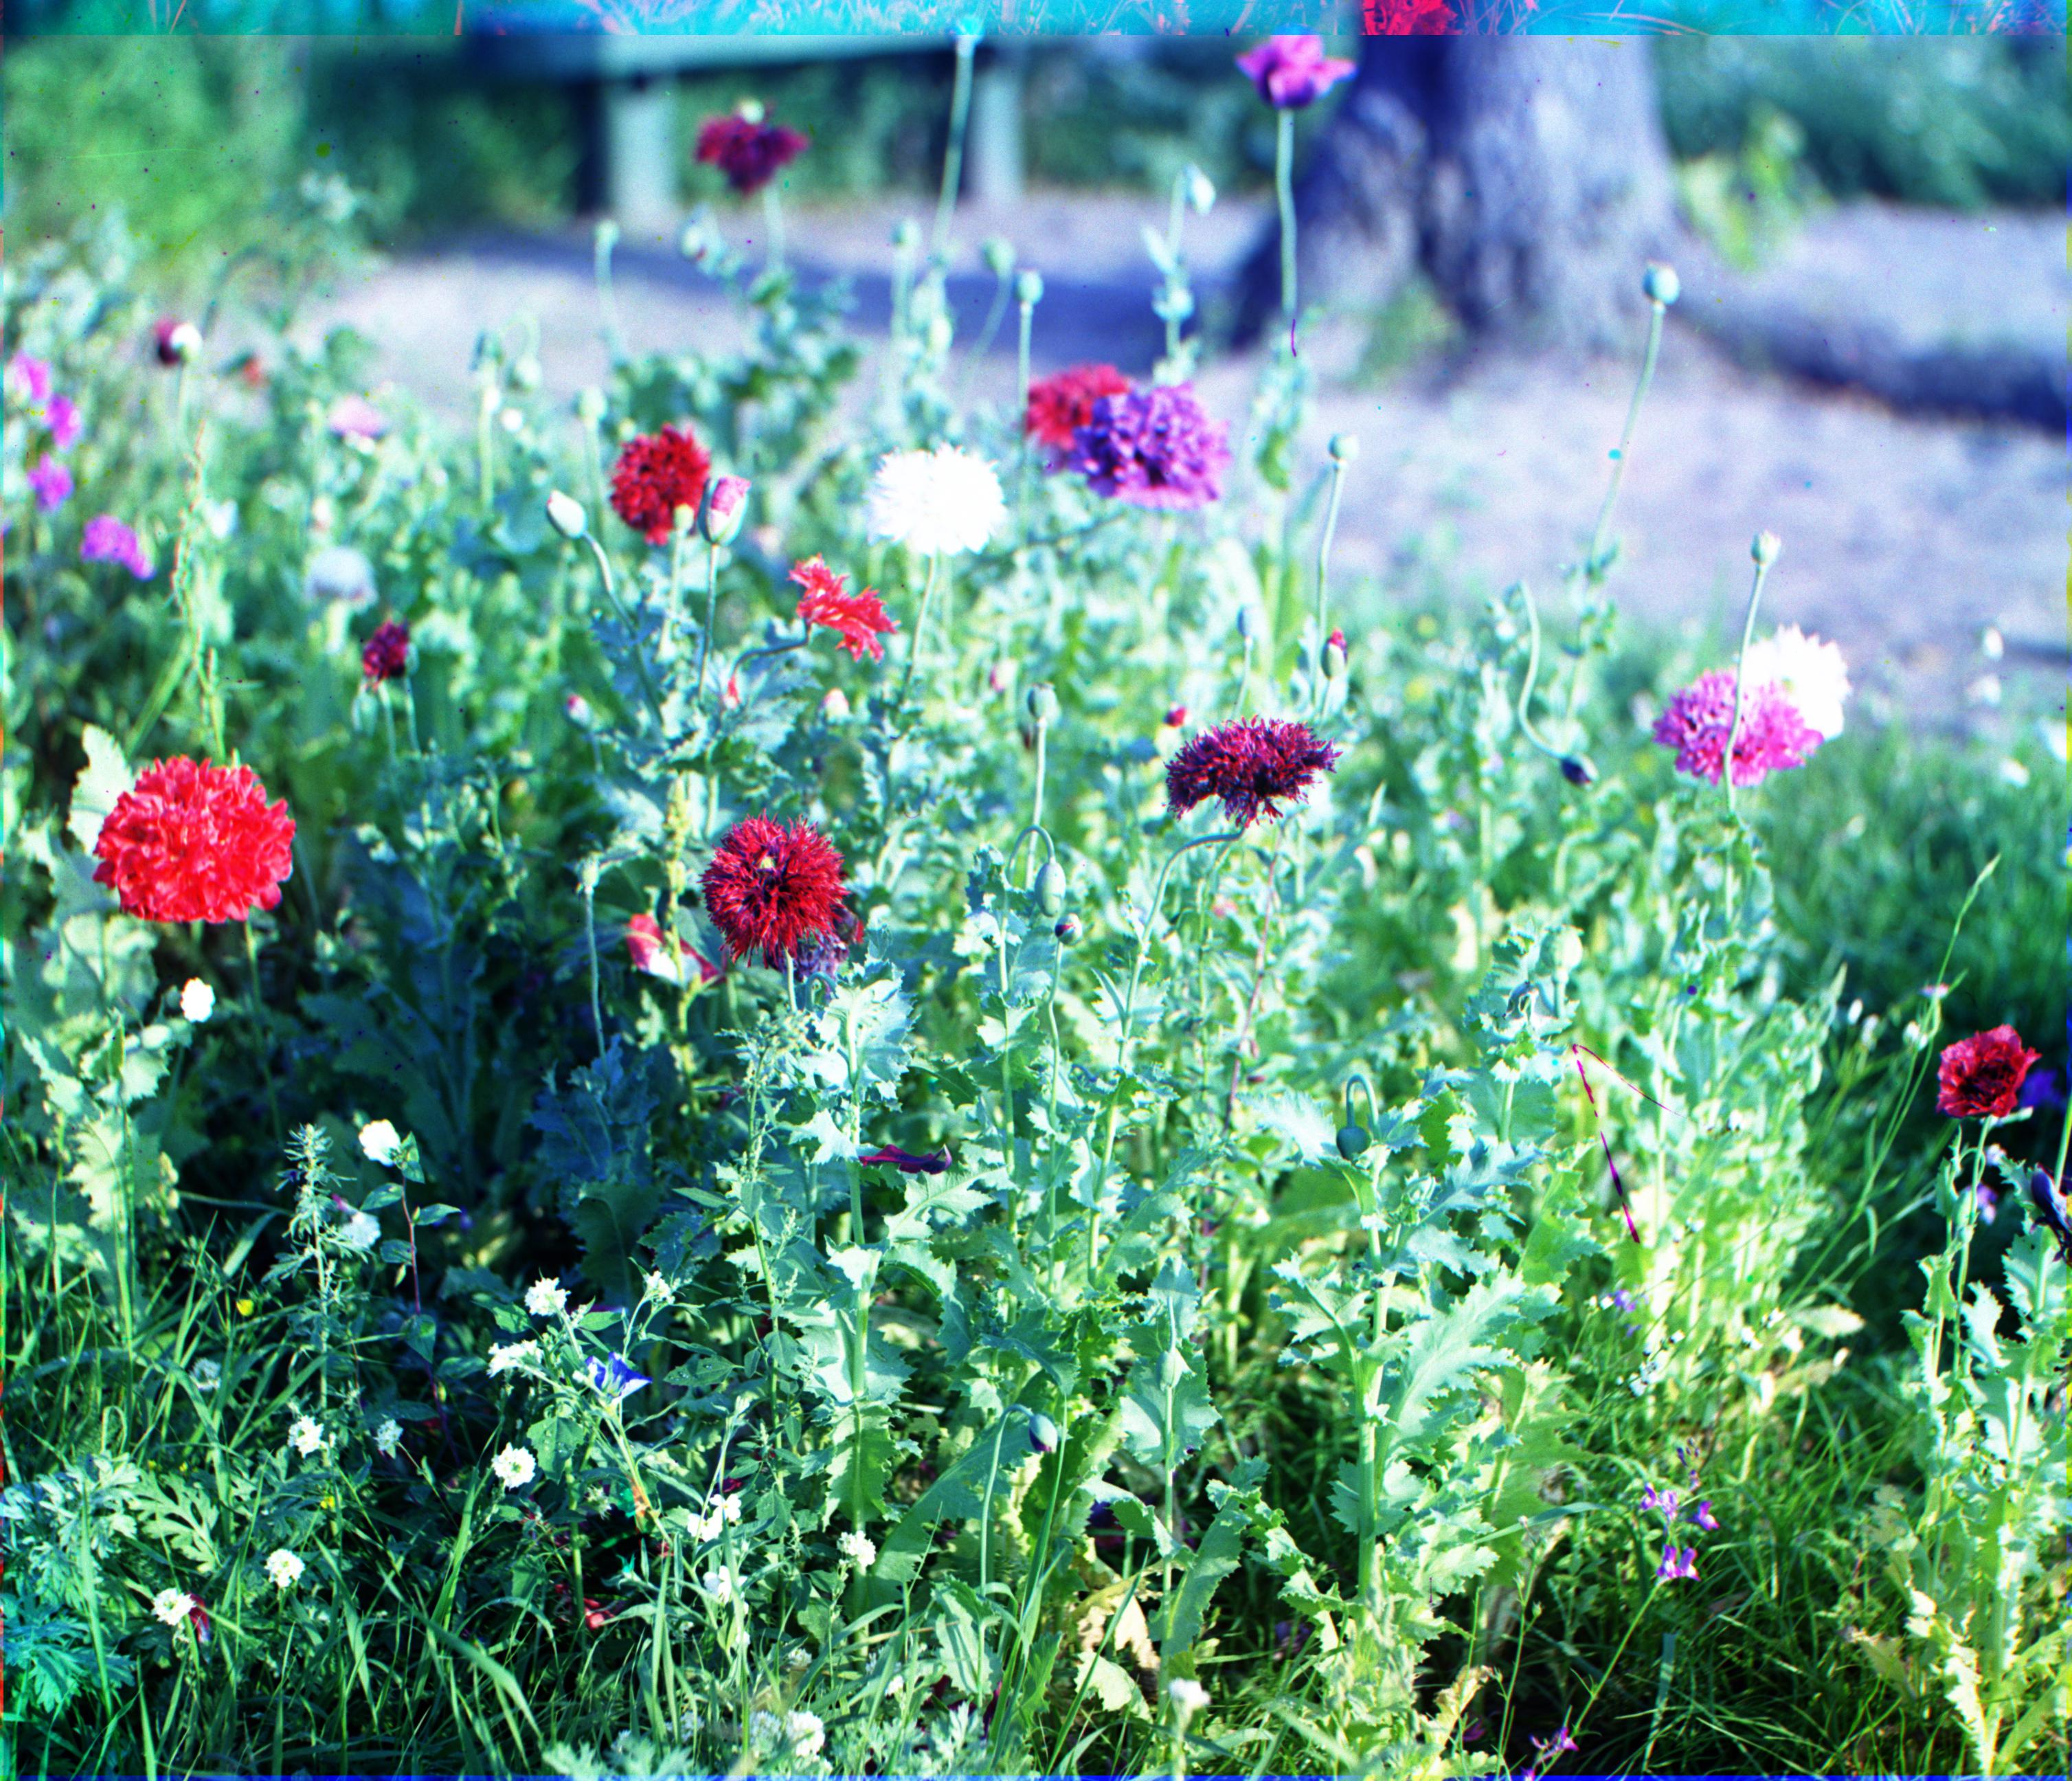 Flowers | Blue shift: (-8, -8) Red shift: (51, 5)